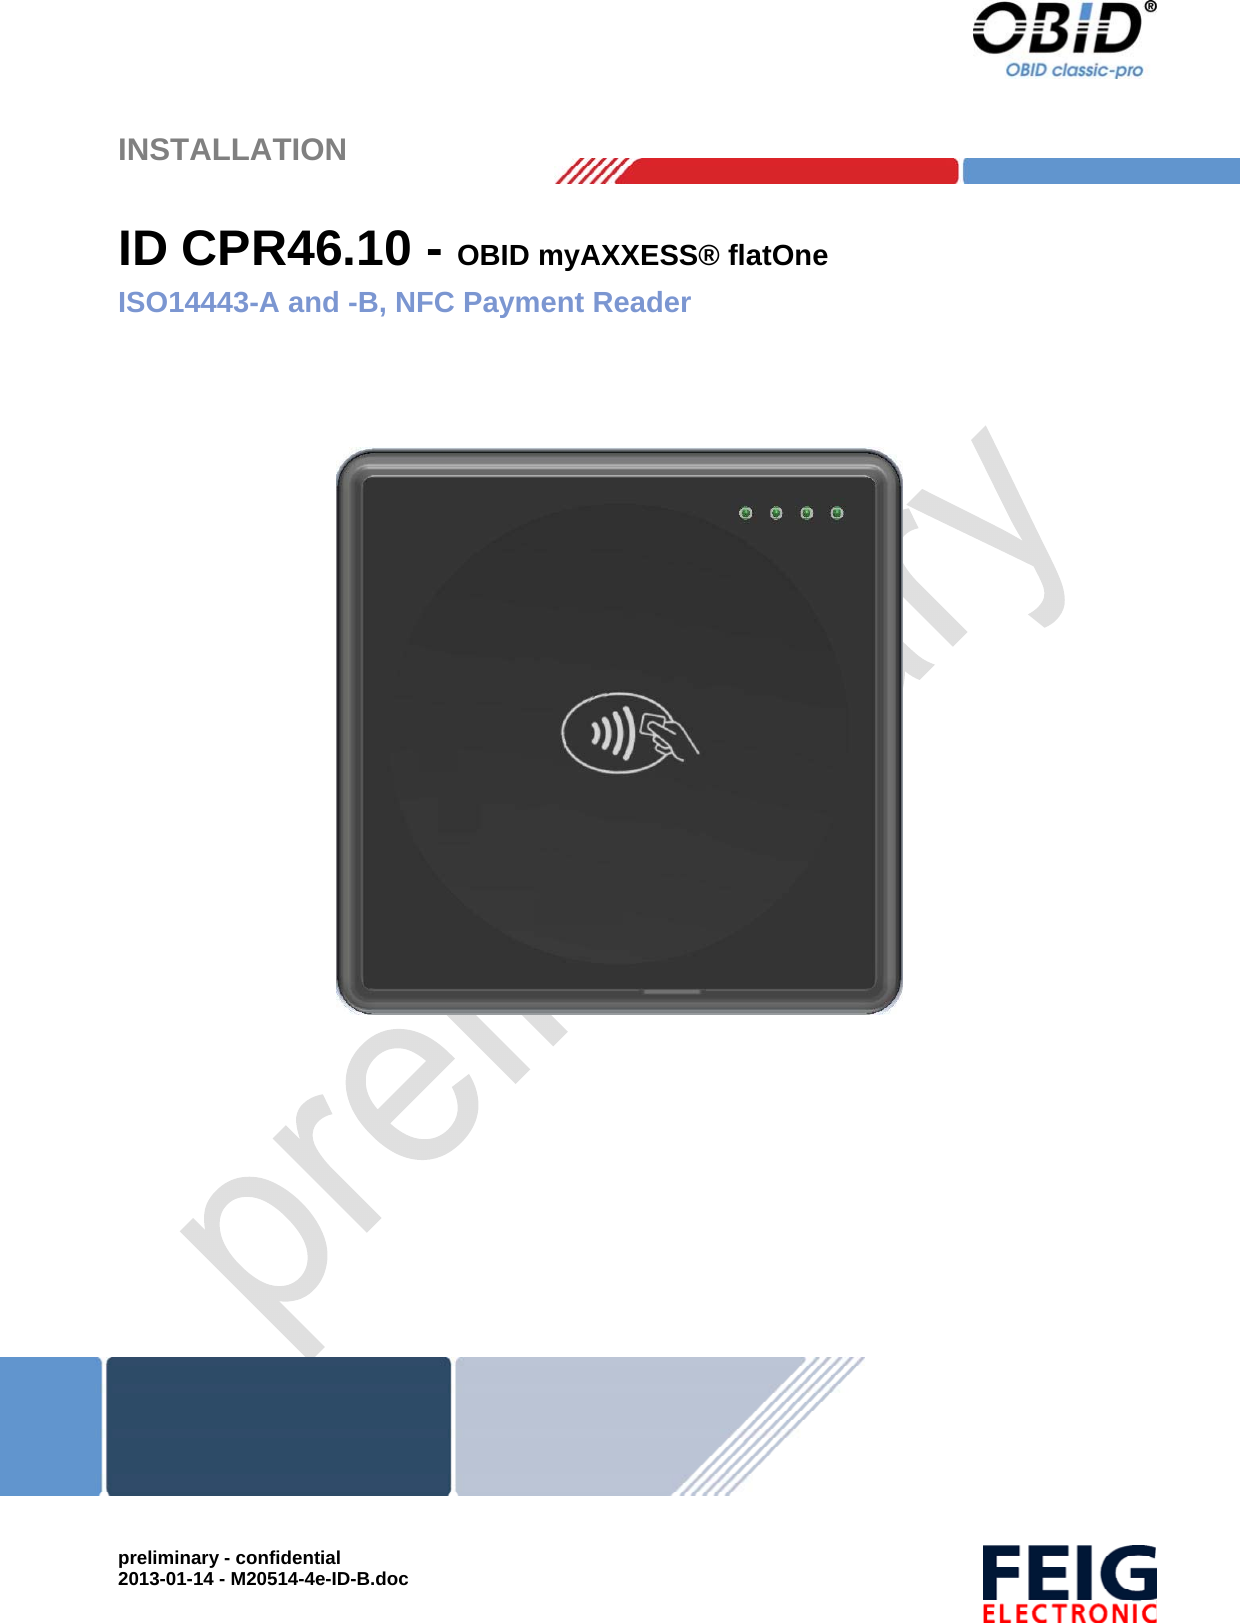    INSTALLATION  preliminary - confidential 2013-01-14 - M20514-4e-ID-B.doc   ID CPR46.10 - OBID myAXXESS® flatOneISO14443-A and -B, NFC Payment Reader          